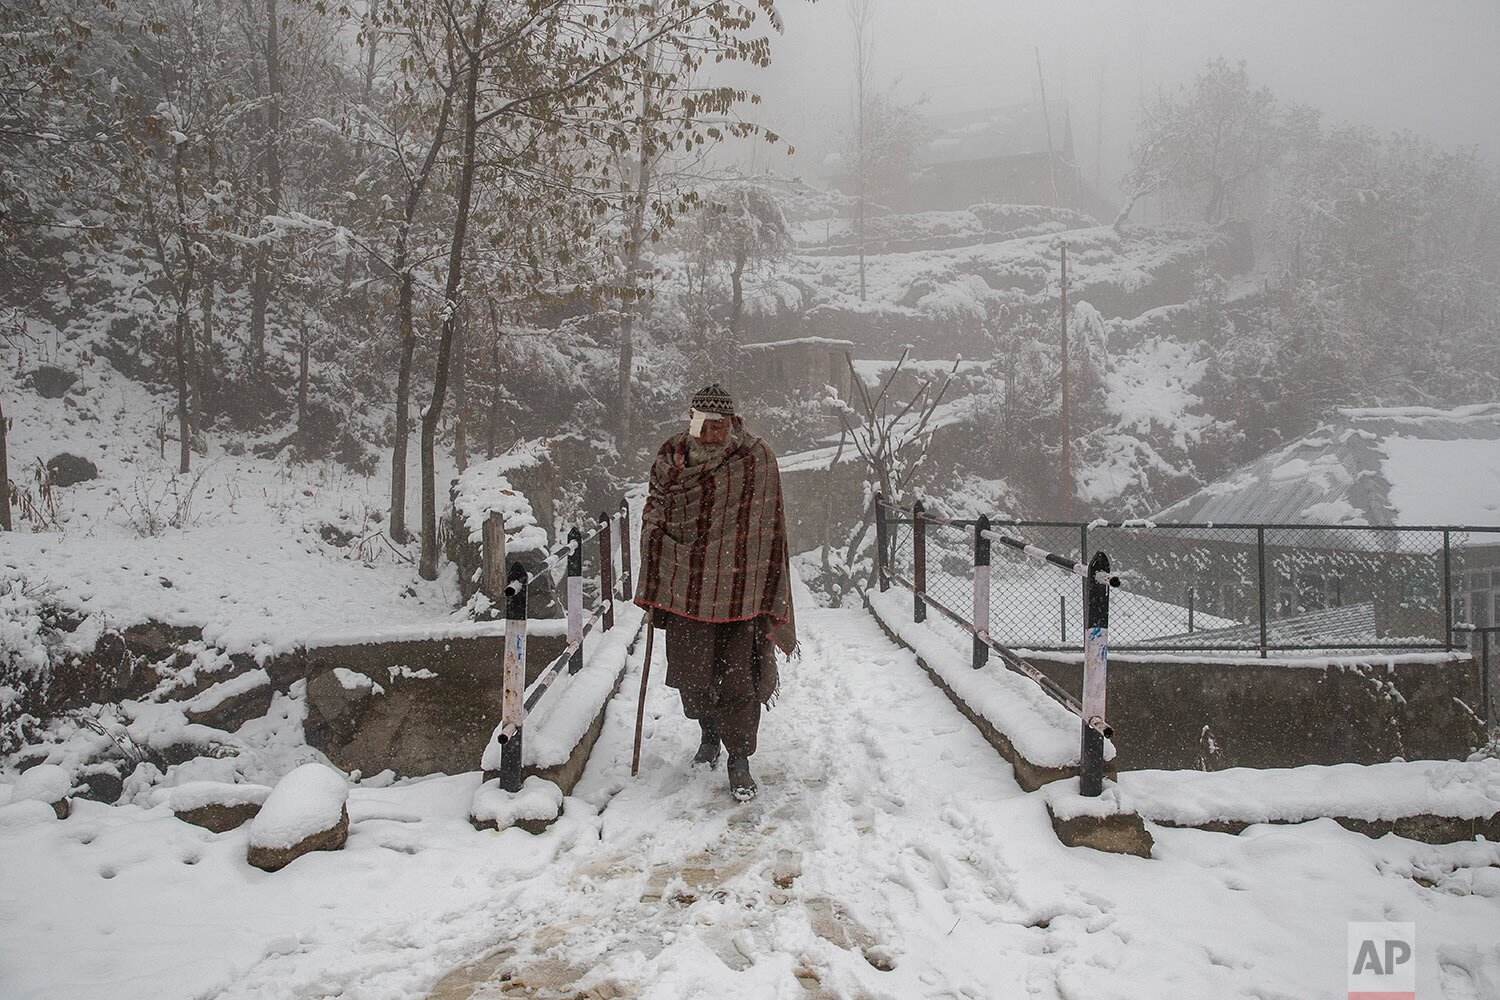  An elderly Kashmir villager walks on a snow covered road during the season's first snowfall on the outskirts of Srinagar, Indian controlled Kashmir, Monday, Nov. 23, 2020. (AP Photo/Dar Yasin) 